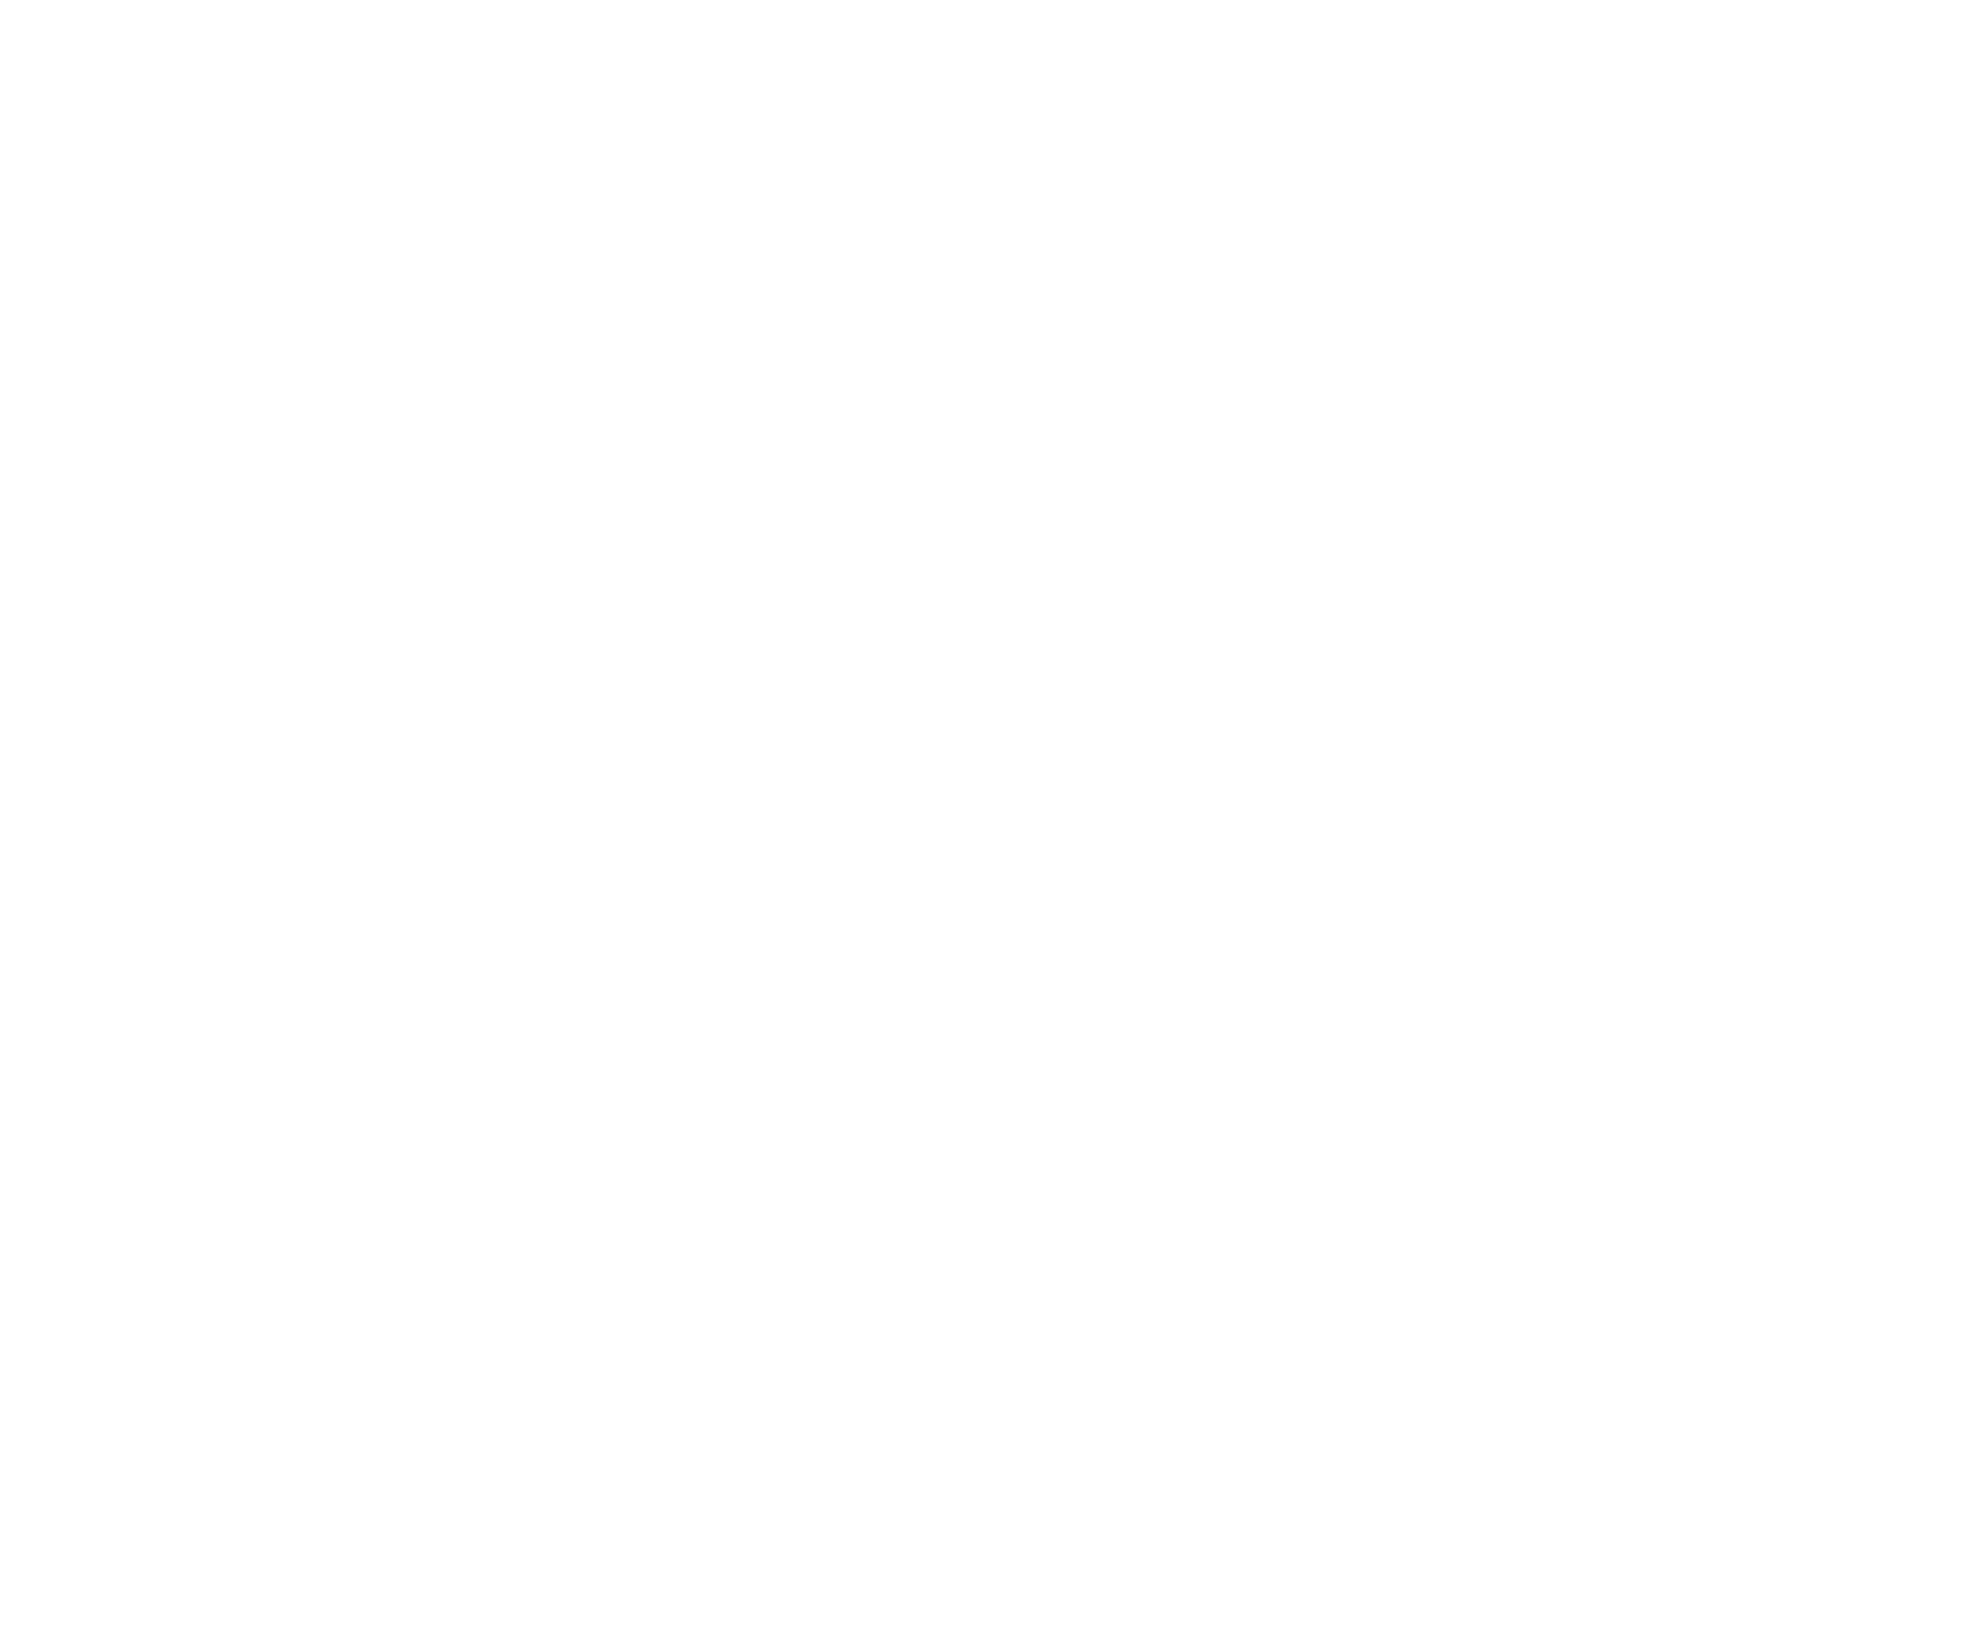 Zero to Landfill - Great Western Recycling